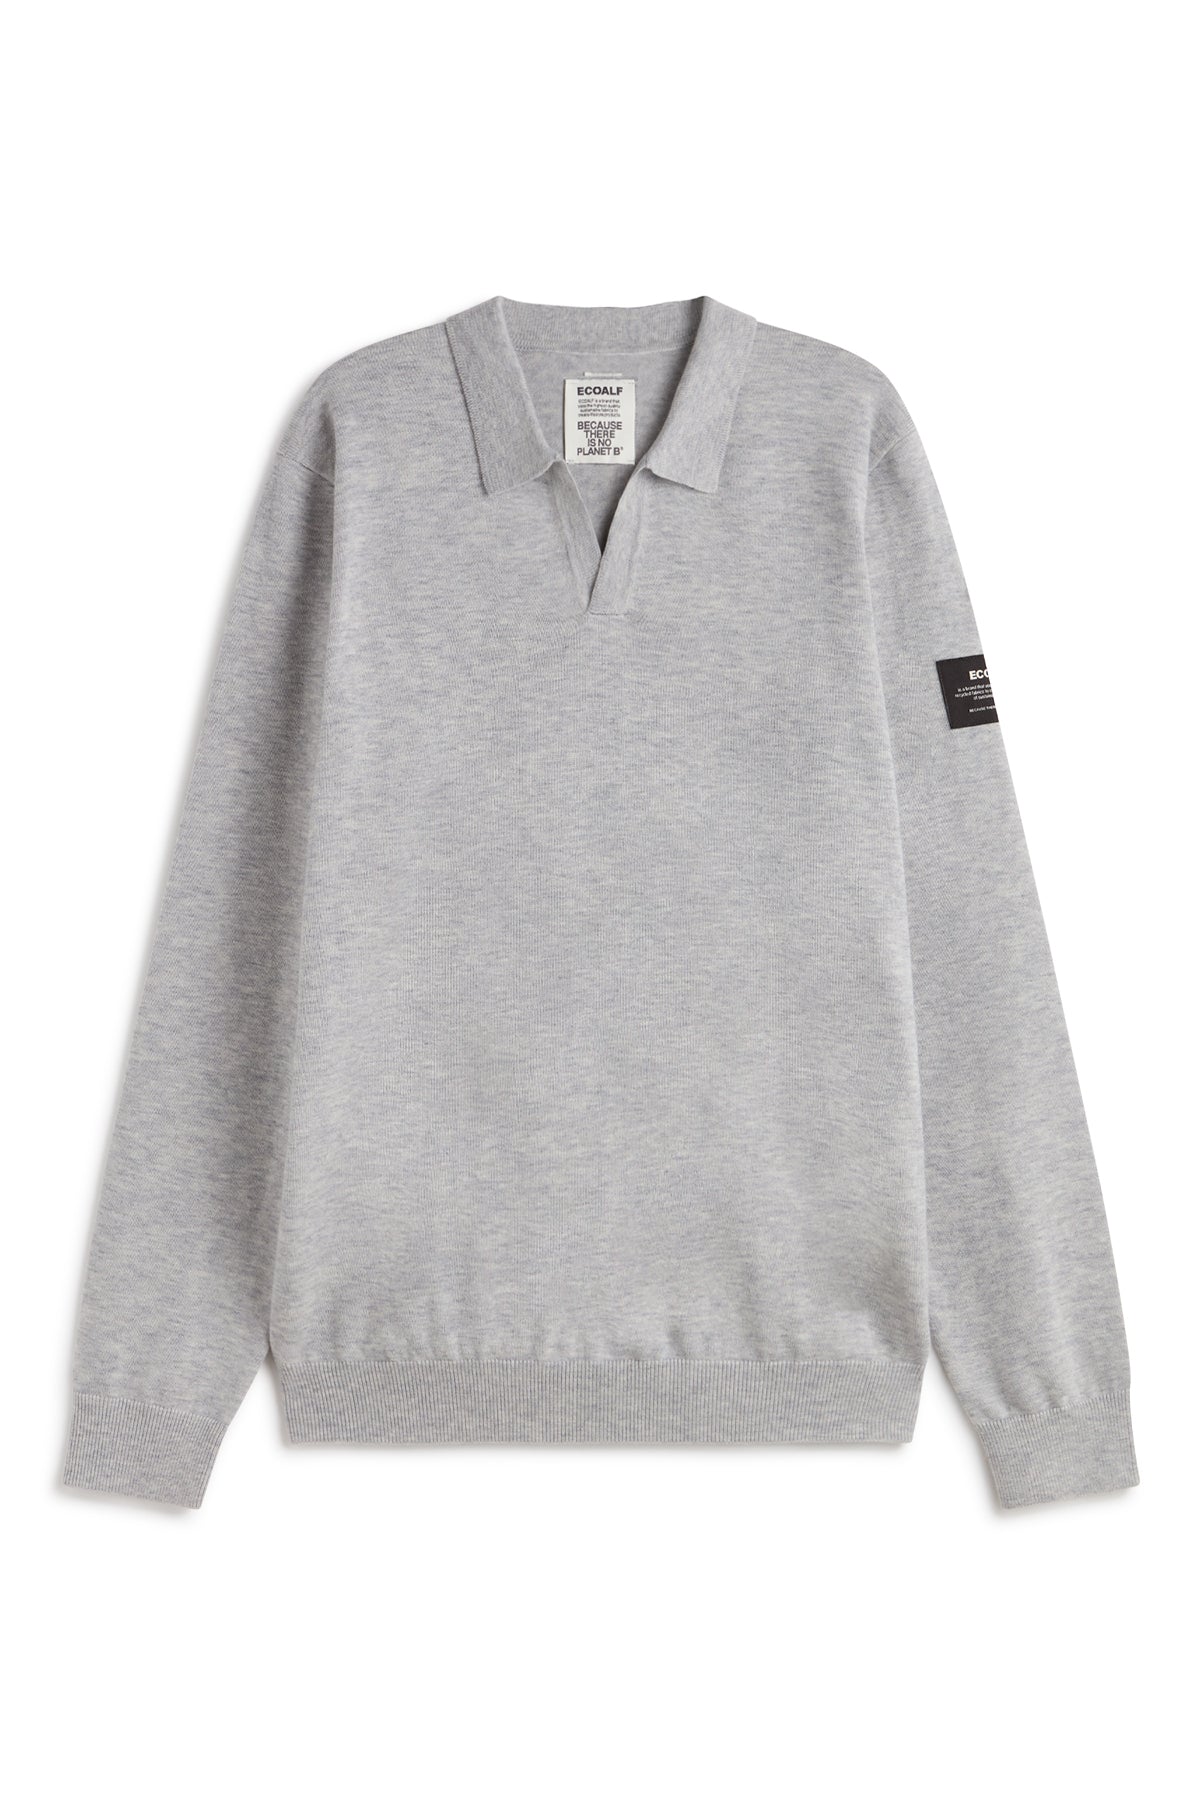 GREY PARRA KNITTED SWEATER